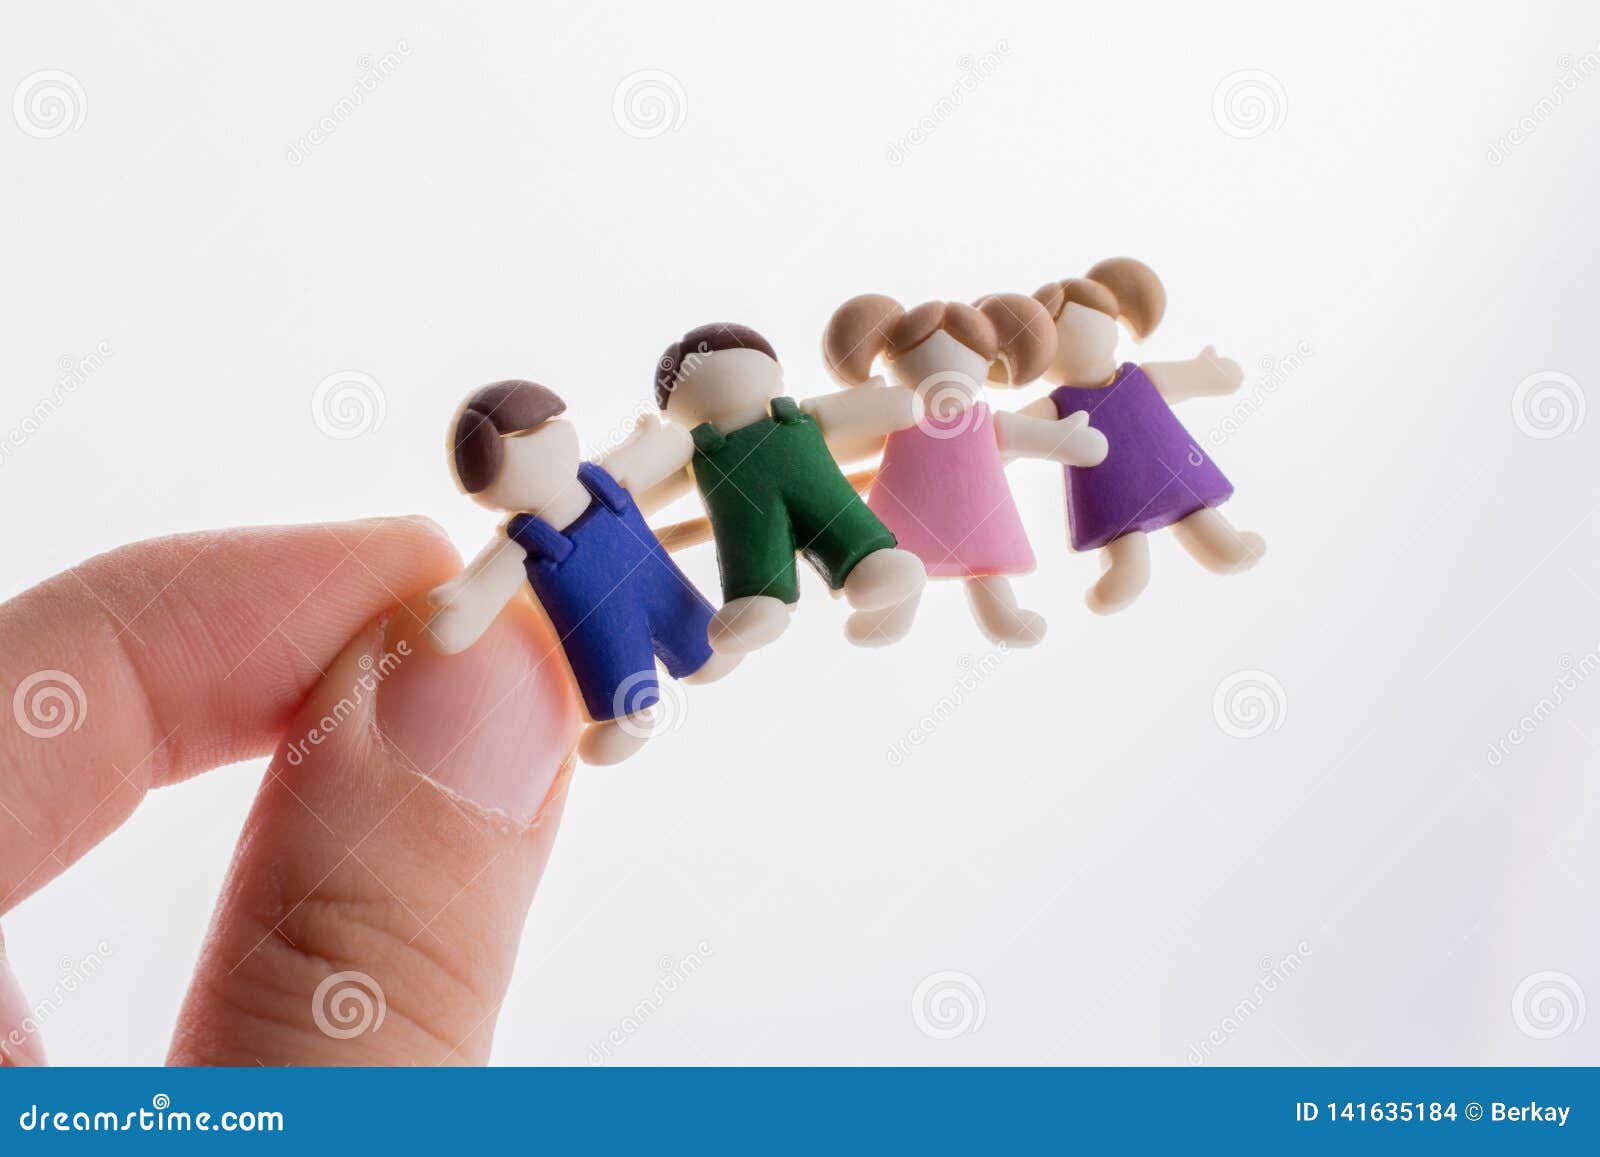 Little Boys and Girls Kid Figurines in Hand Stock Photo - Image of team ...